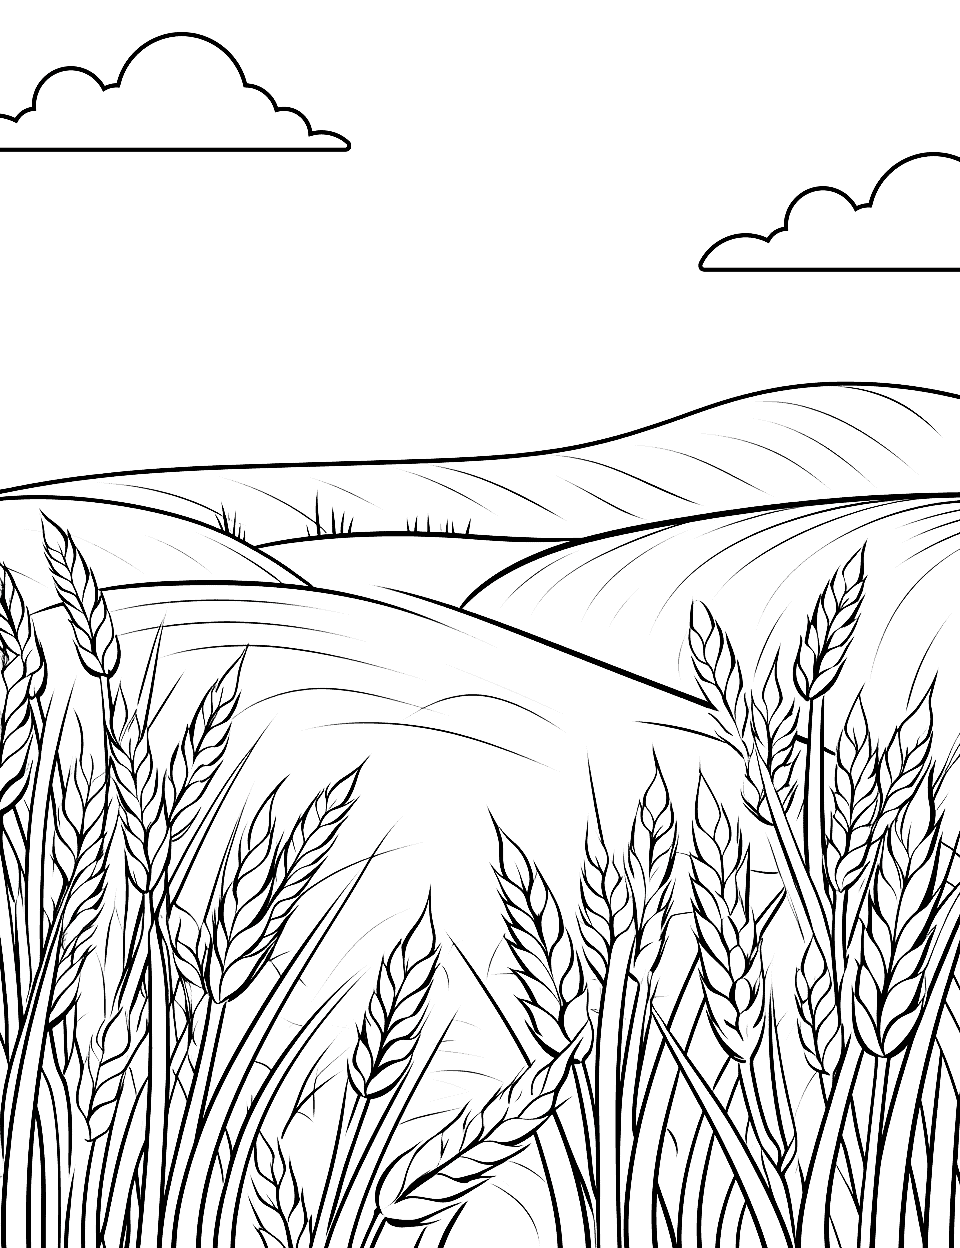 Golden Wheat Field Coloring Page - A golden wheat field ready for harvest, with a clear sky above.